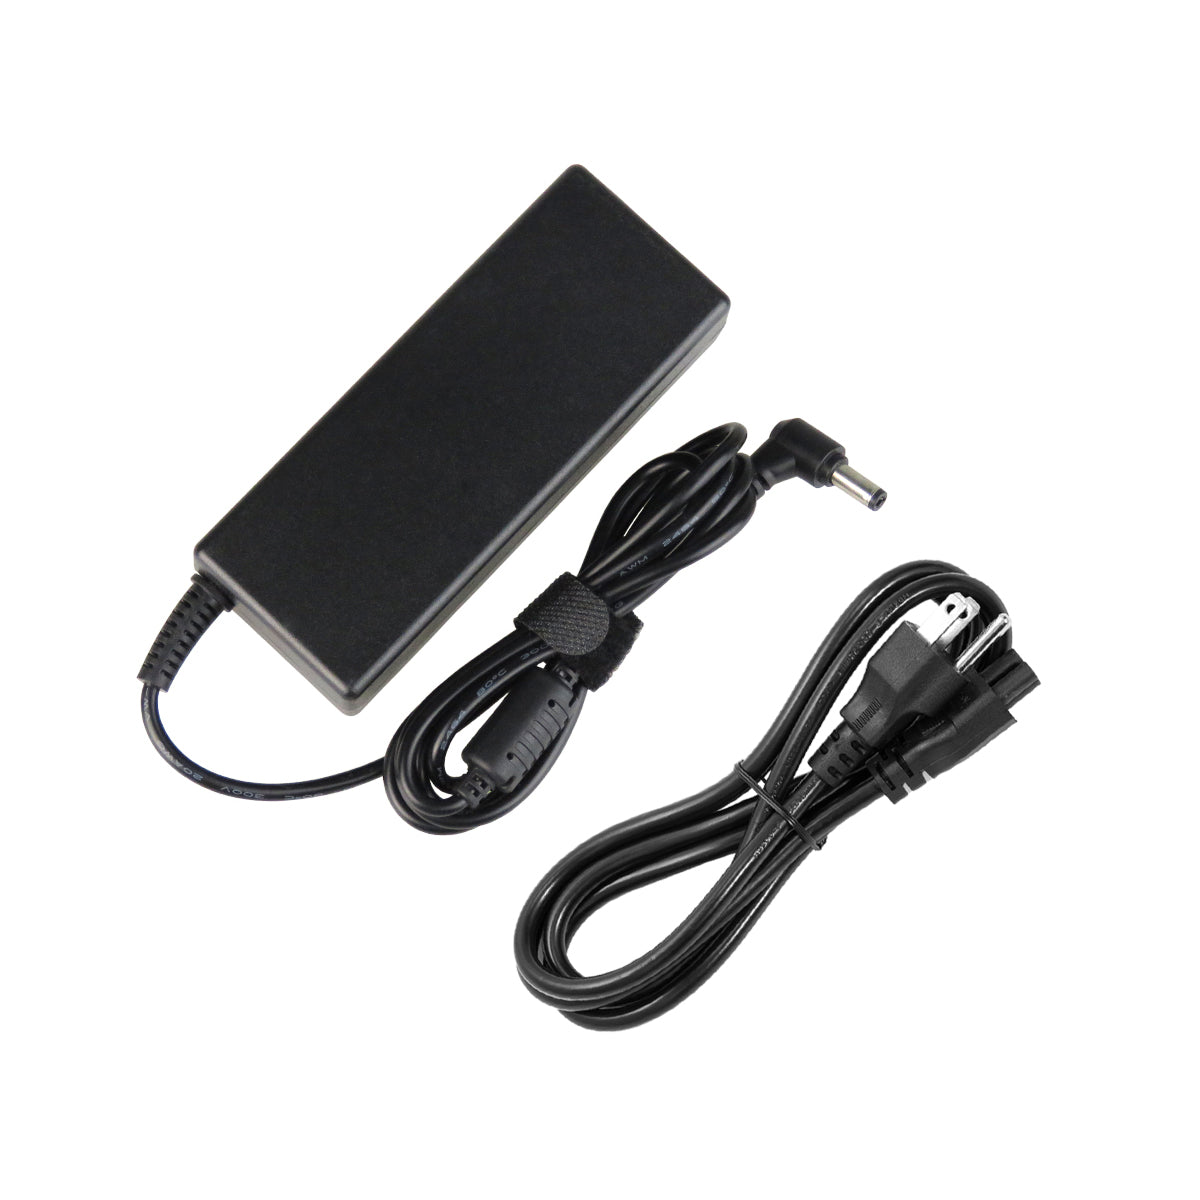 AC Adapter Charger for ASUS X54C-BBK15 Notebook.